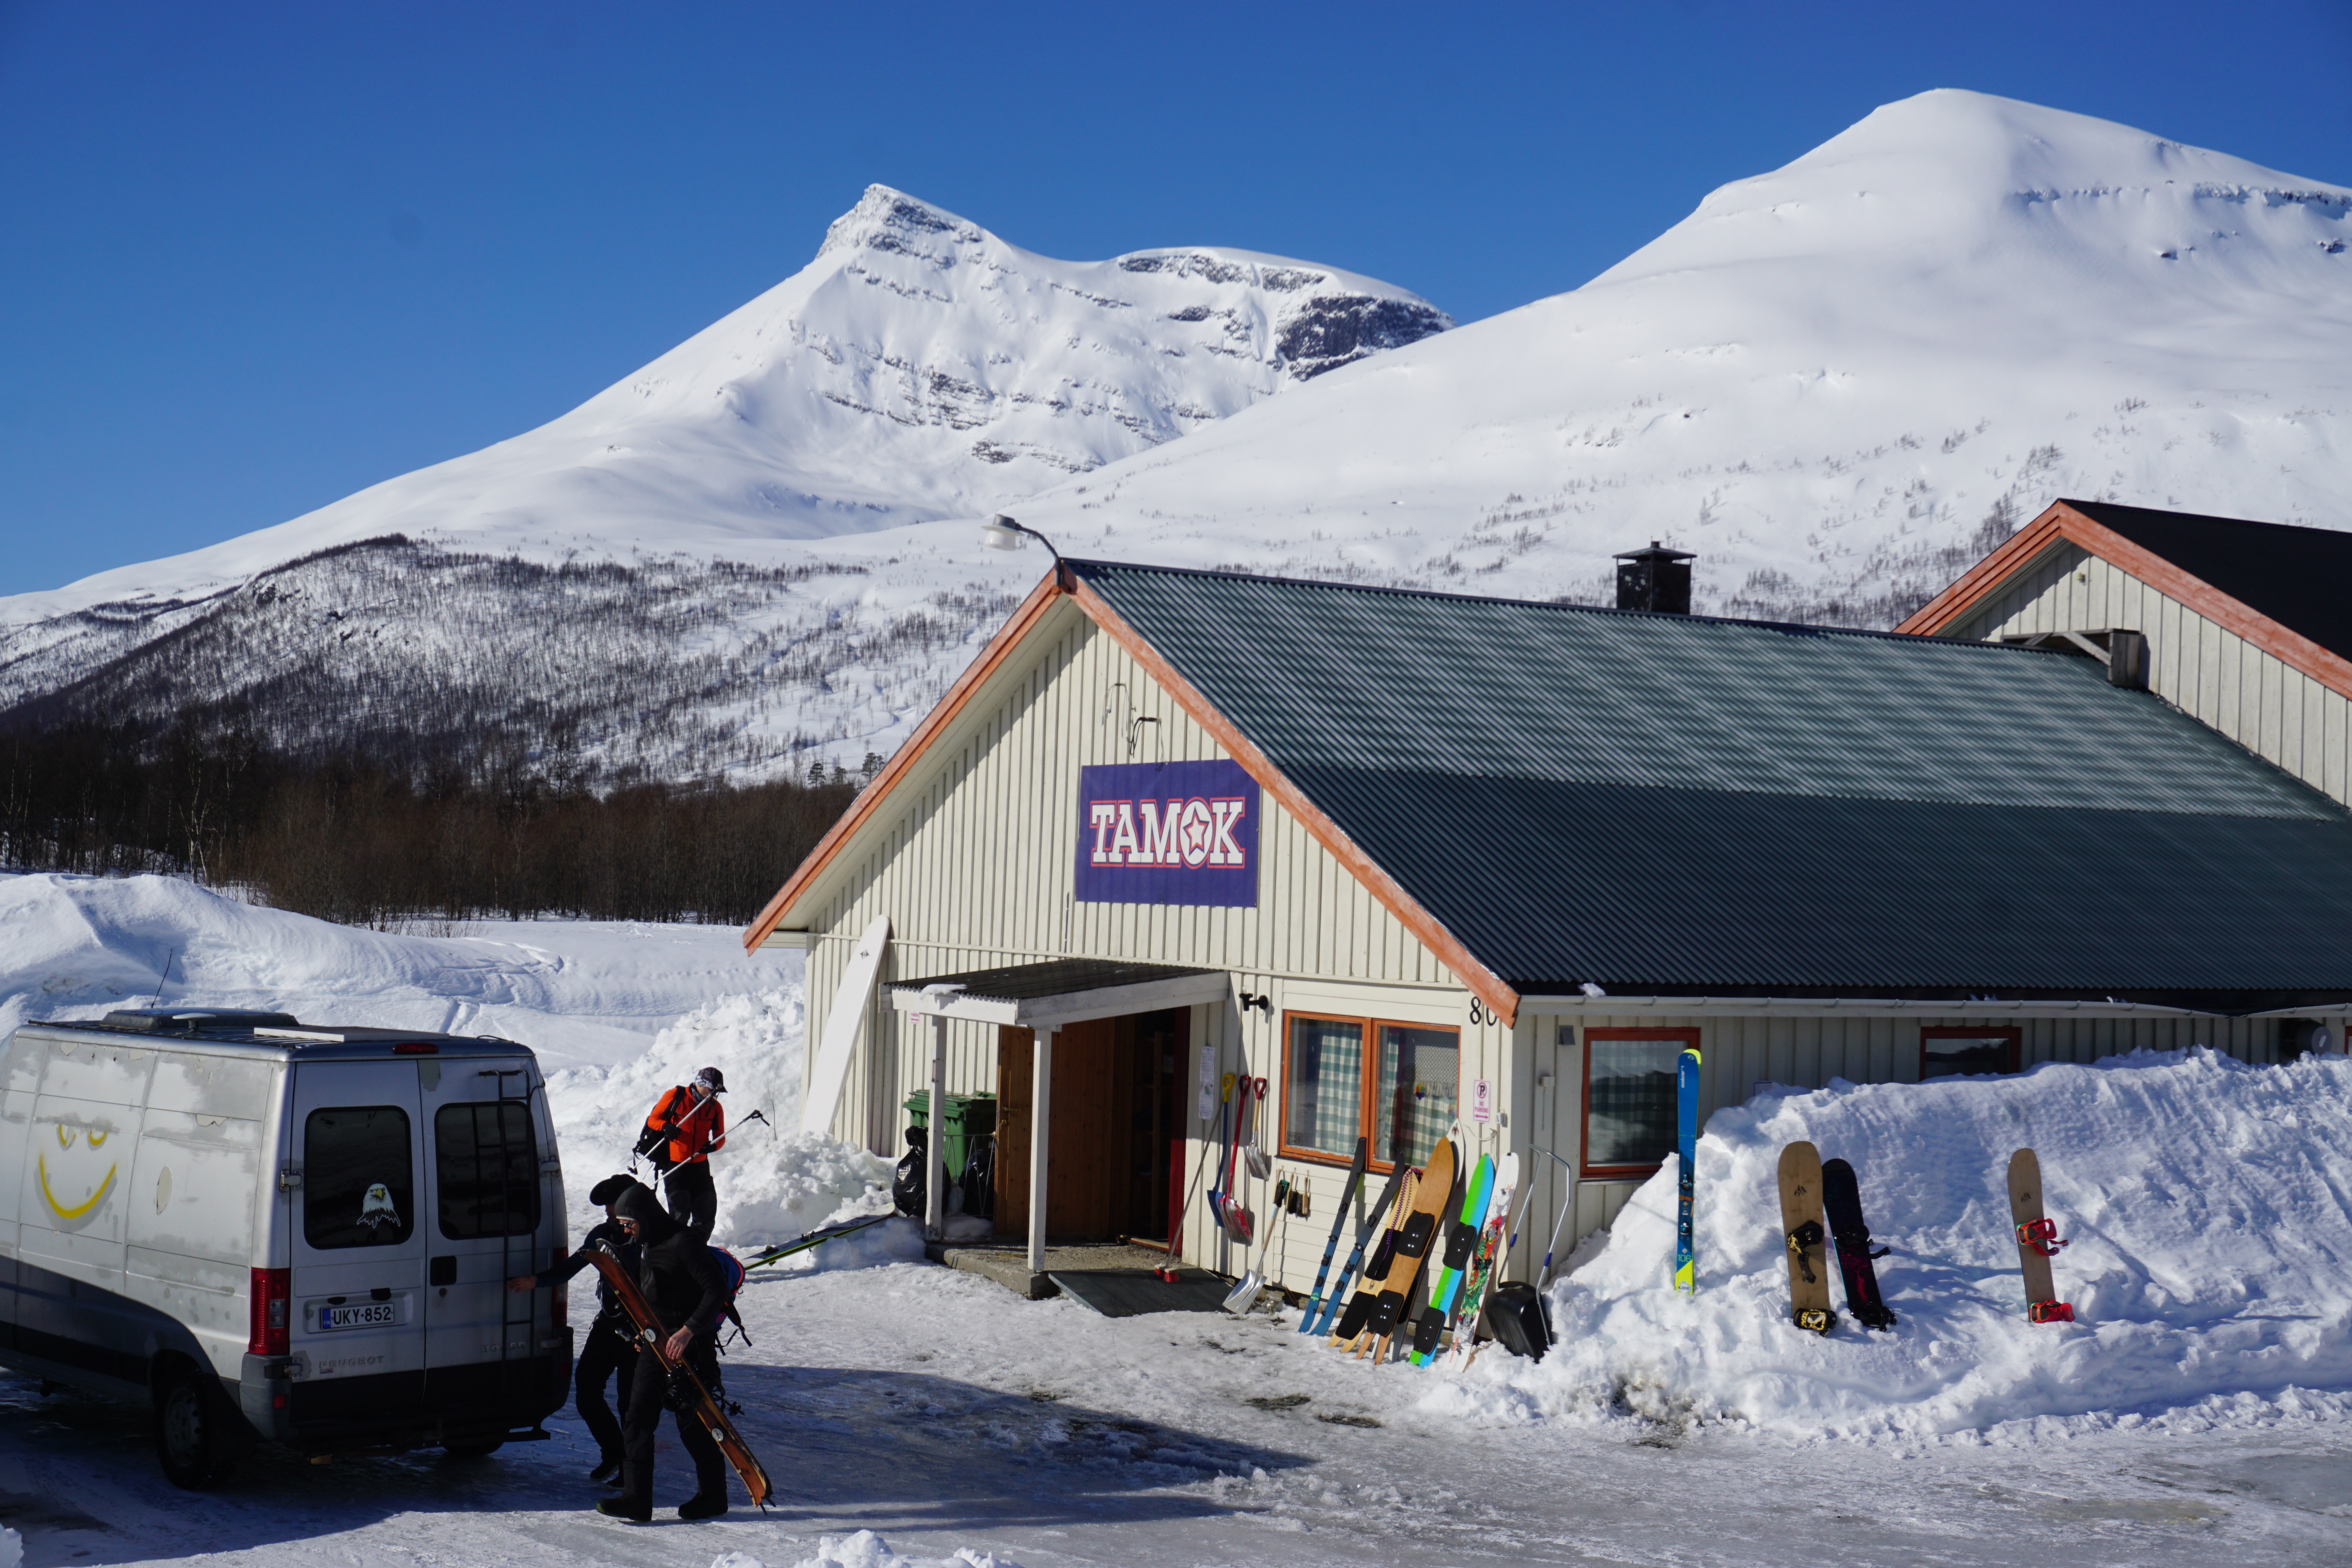 Getting ready for one of many Tamokdalen ski tours directly from the hut while the sun is out